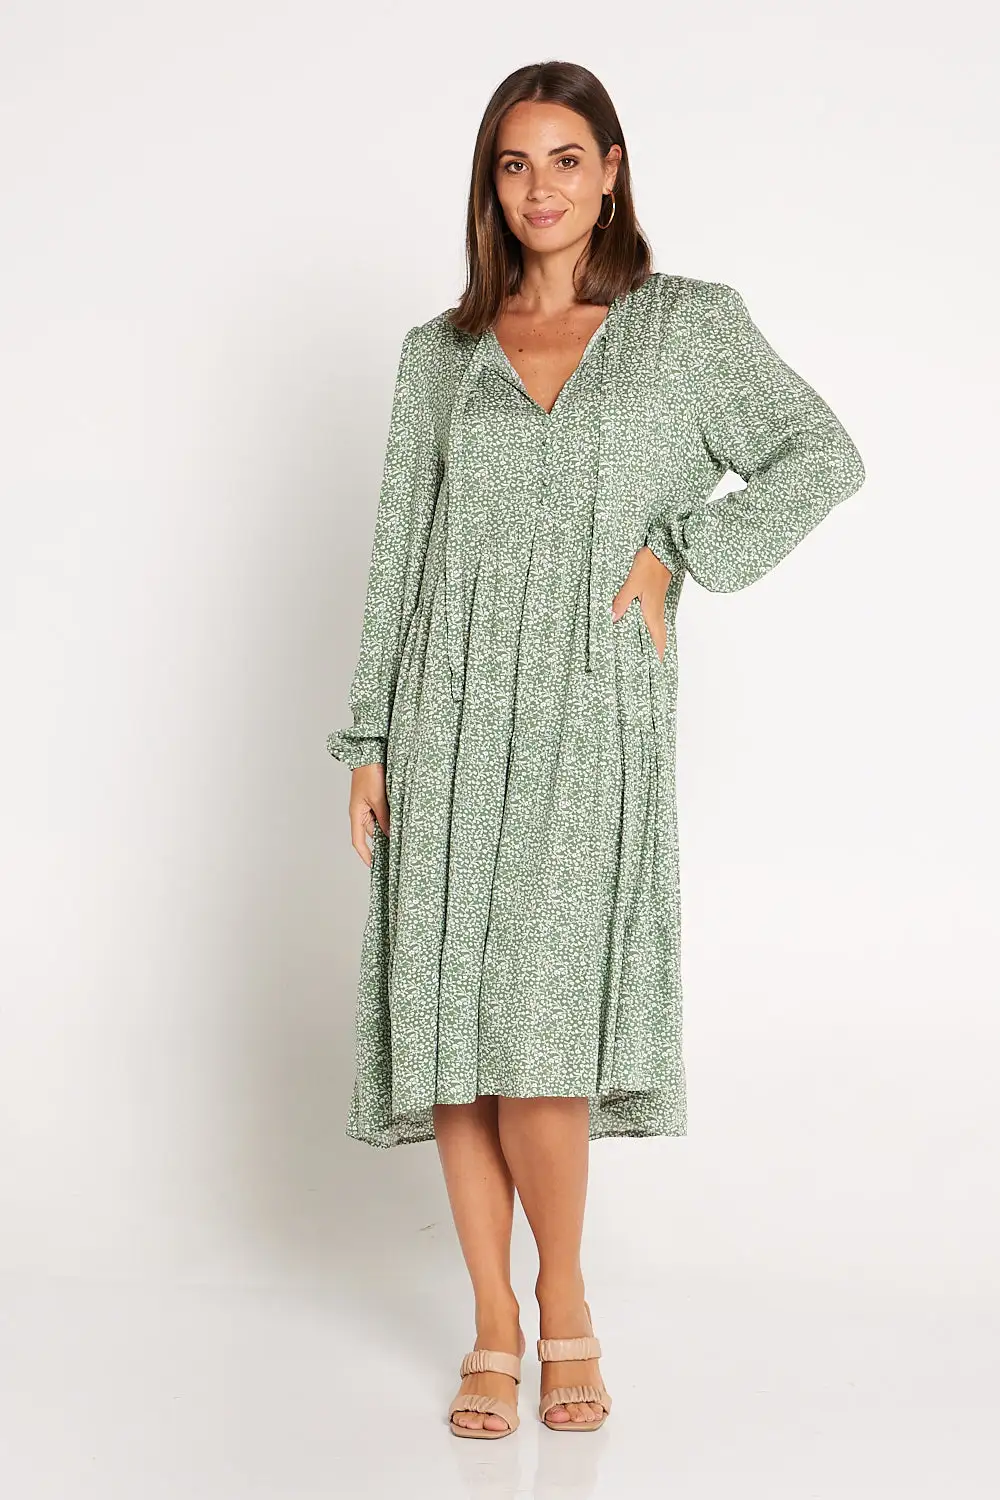 Everly Dress - Sage Ditsy Floral